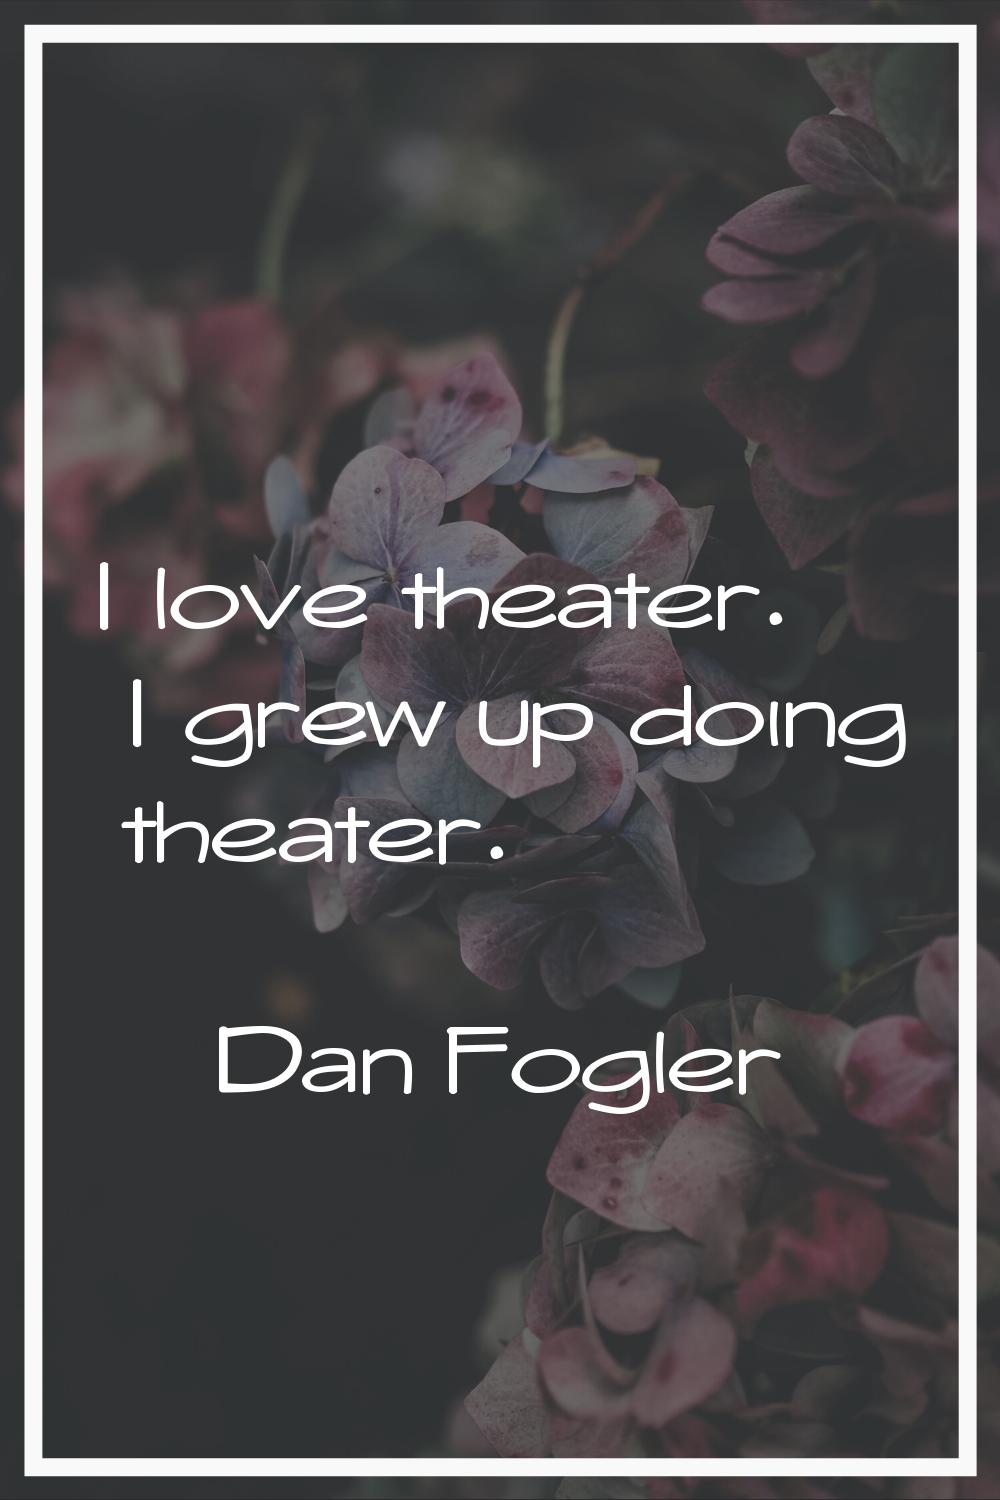 I love theater. I grew up doing theater.